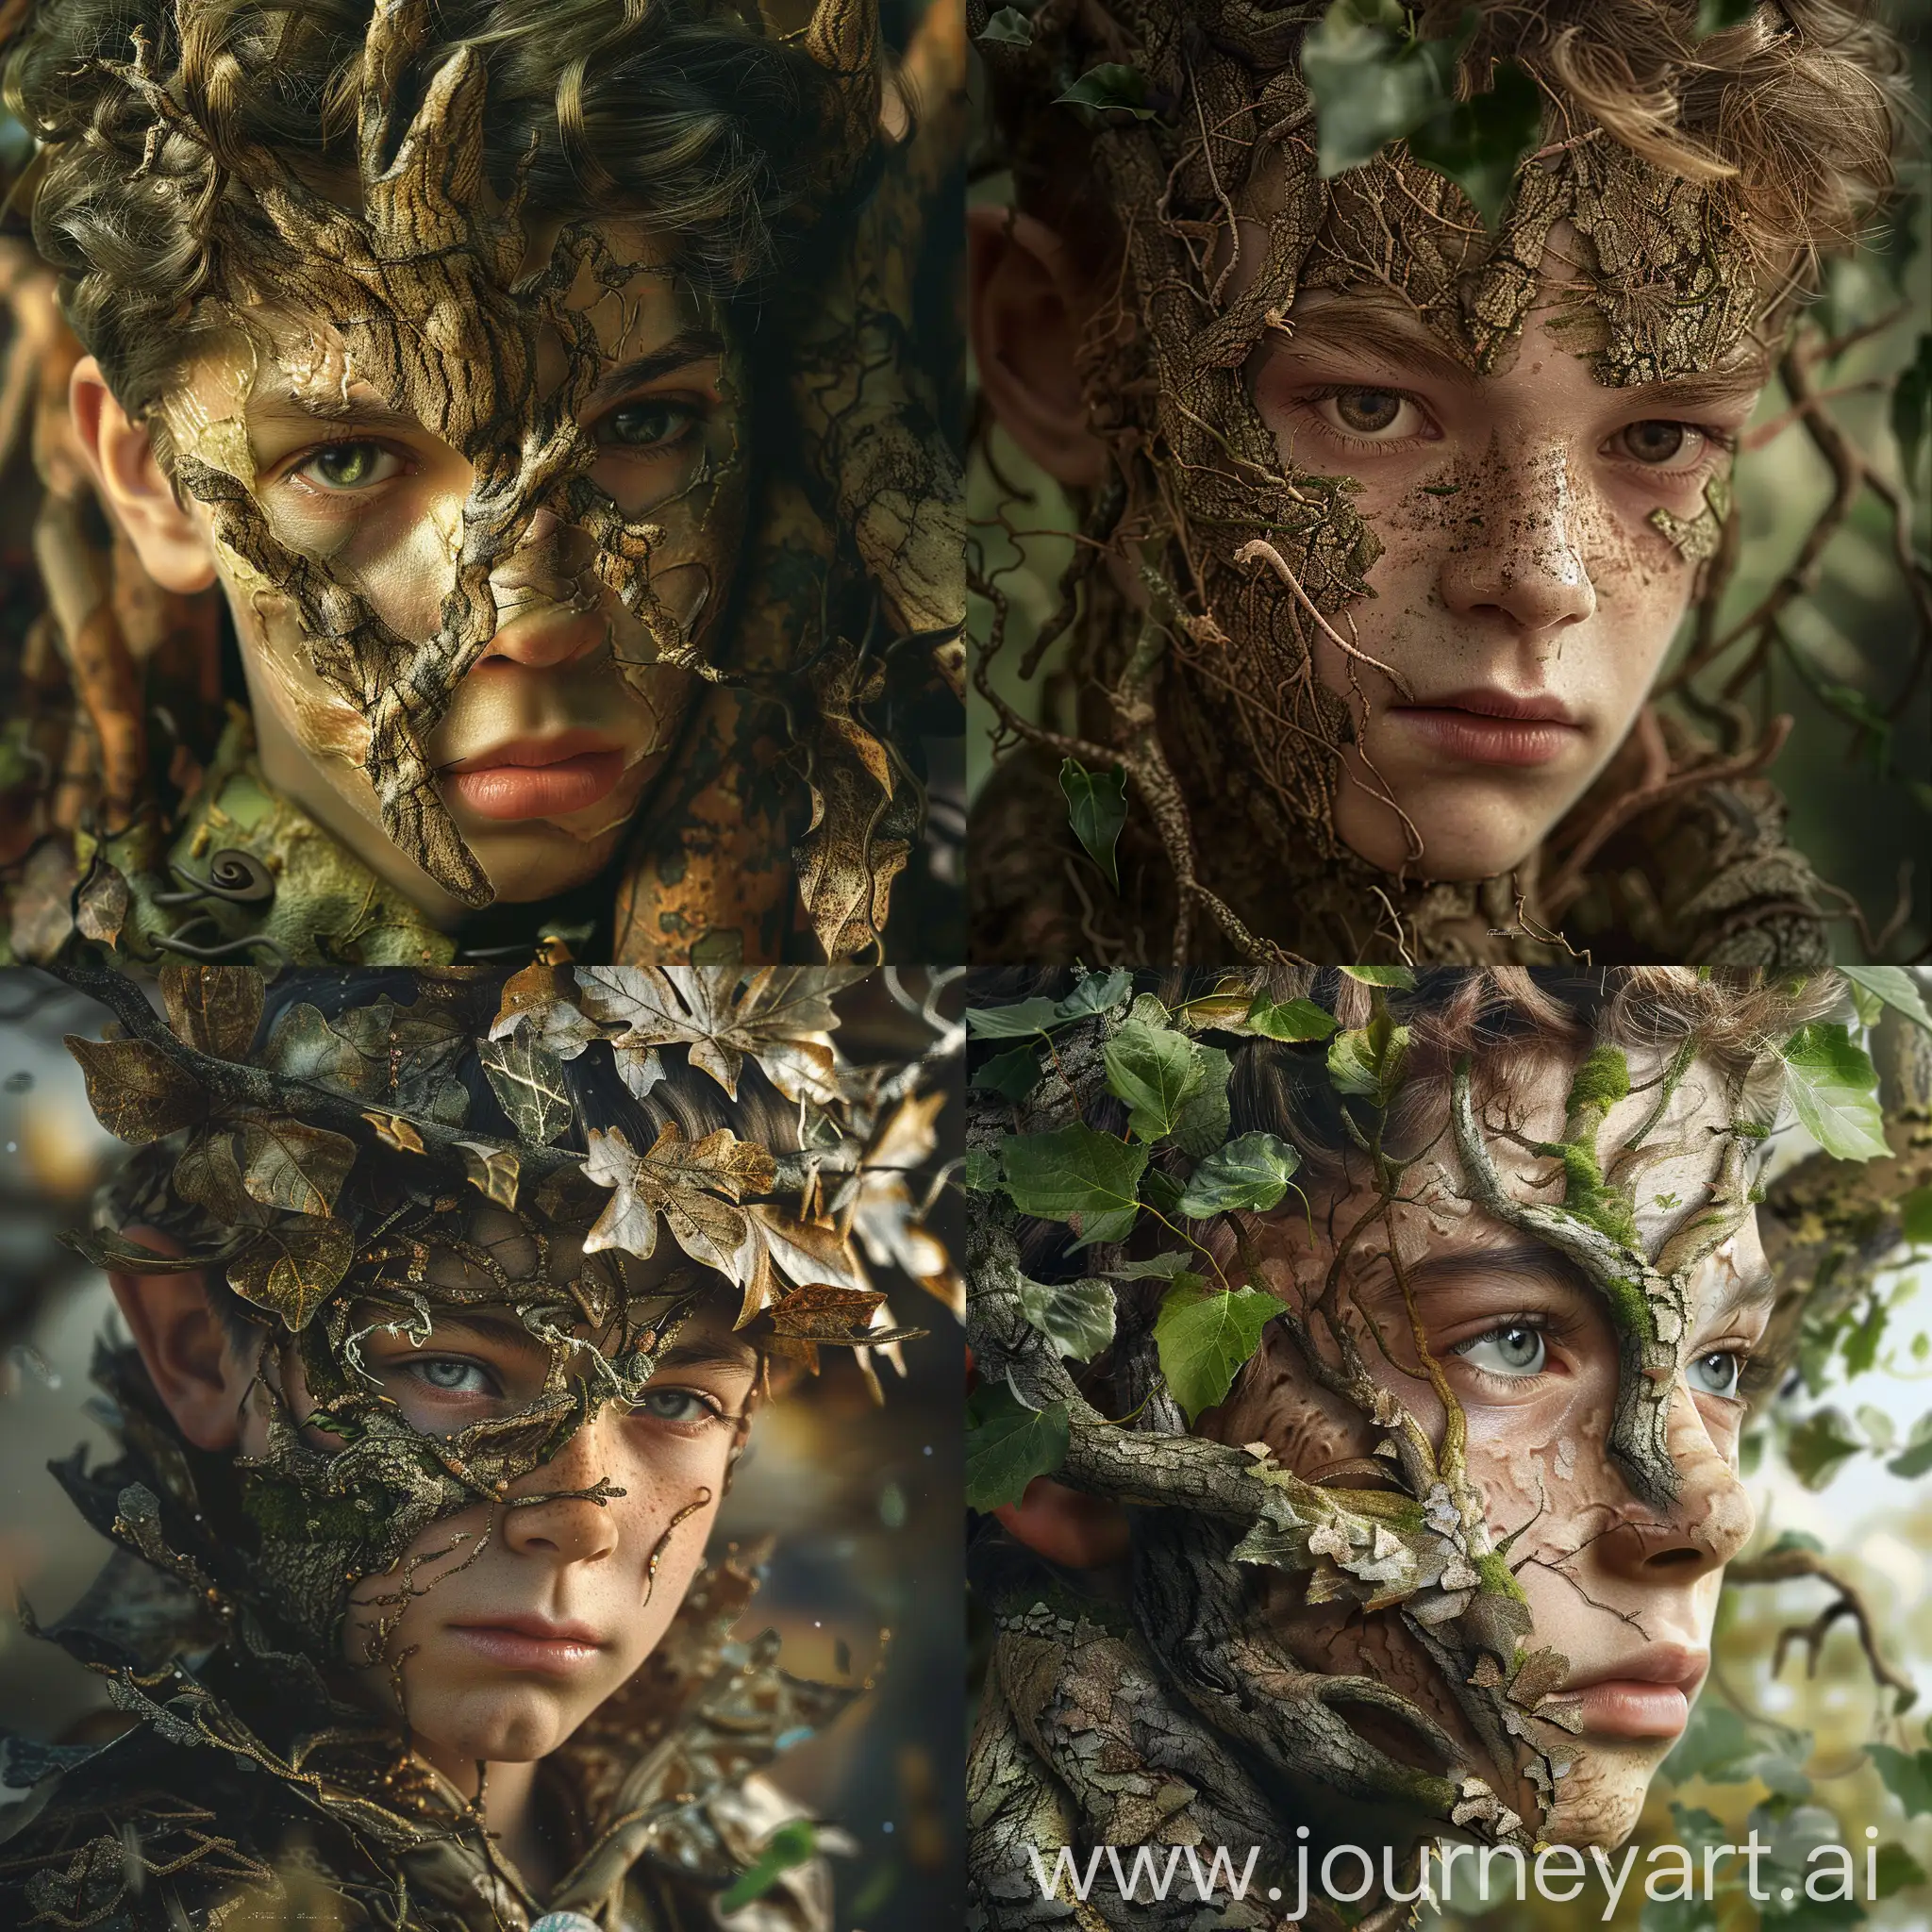  Young unlucky sorcerer teenage boy accidentally transforms himself into tree, magic gone wrong, fairytale fantasy, photorealistic, ultradetailed, imaginative. 